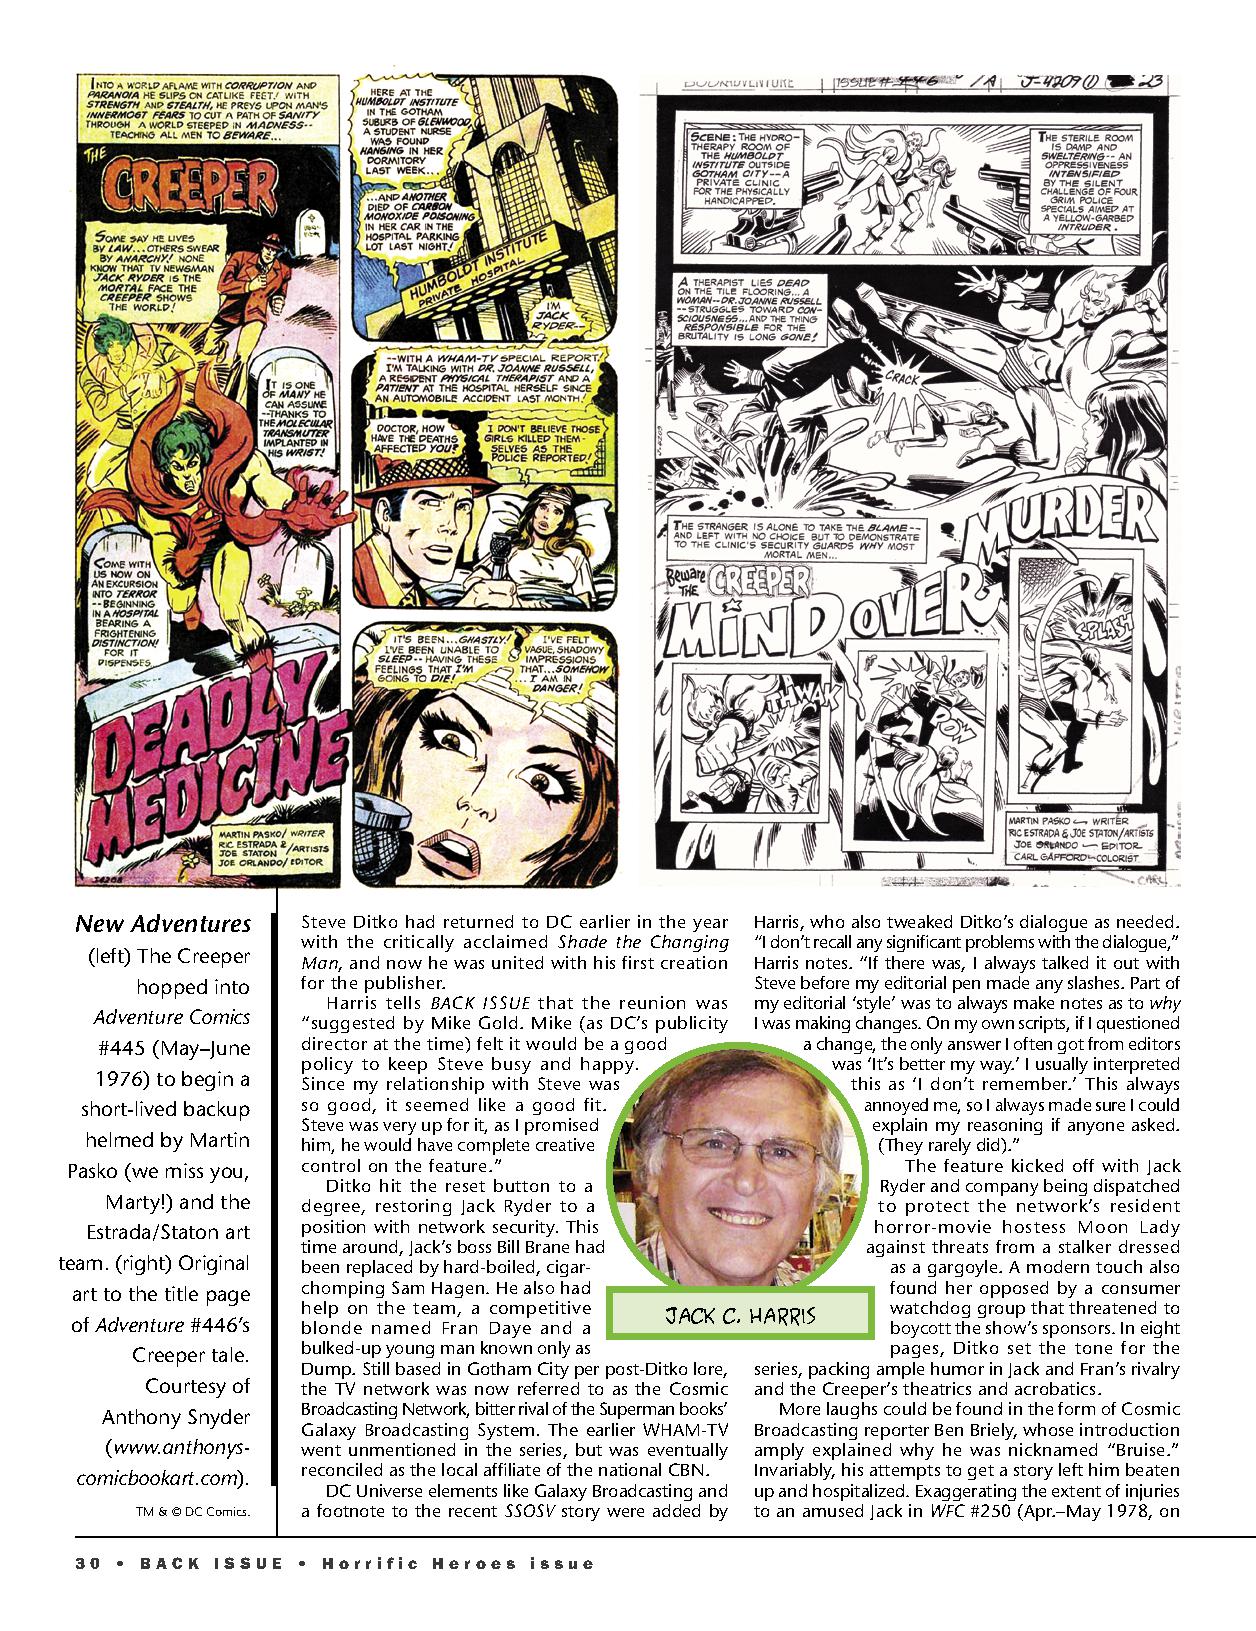 Read online Back Issue comic -  Issue #124 - 32